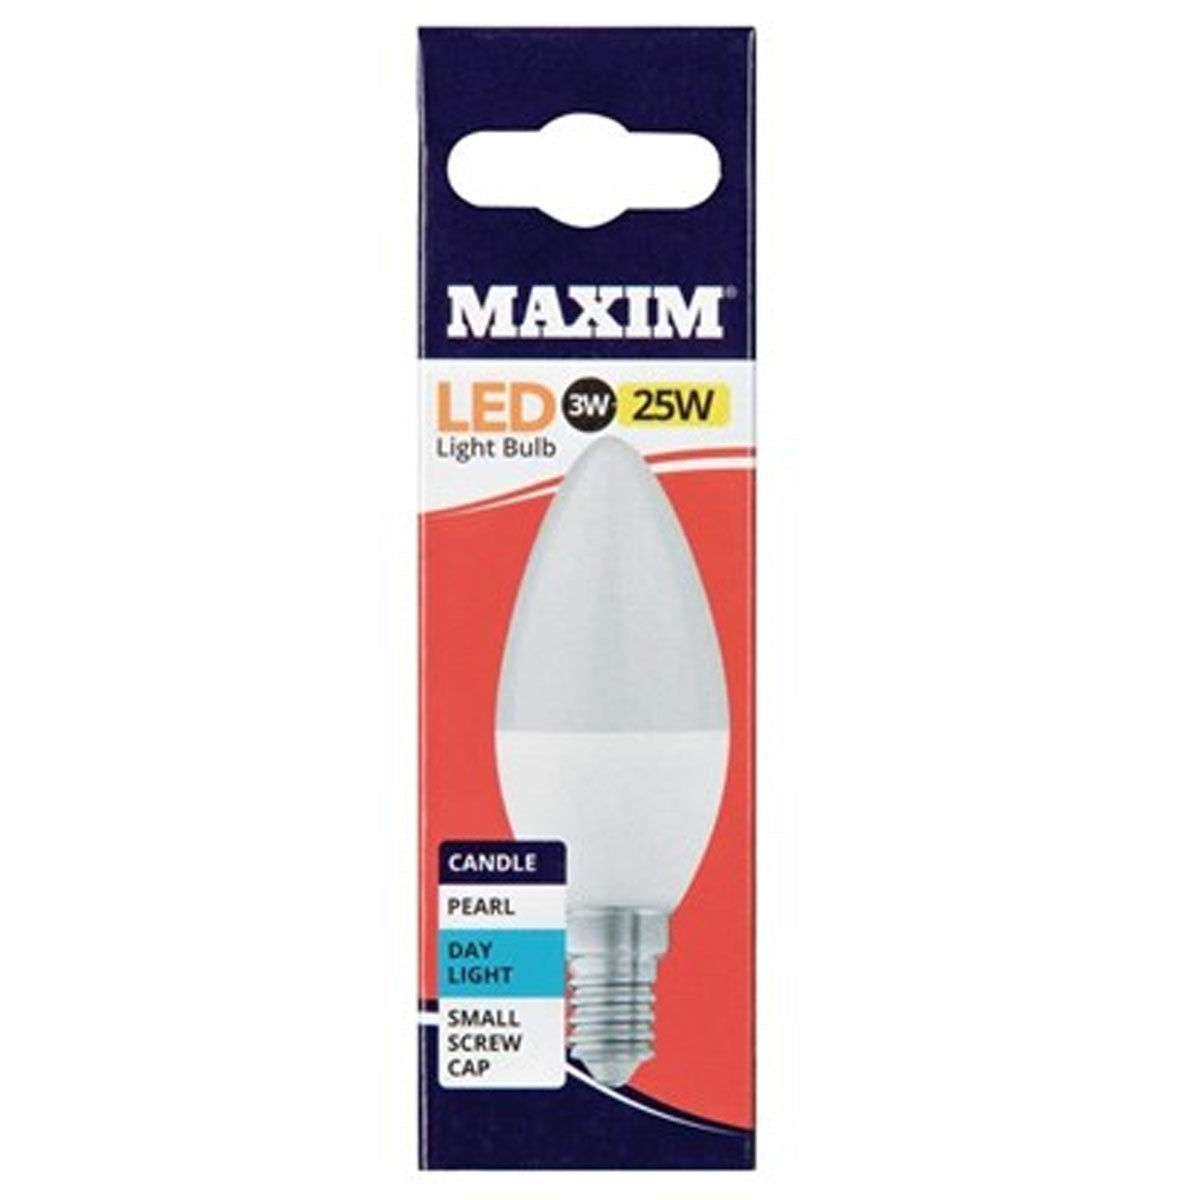 Maxim - Led Candle Light - 25W - Continental Food Store